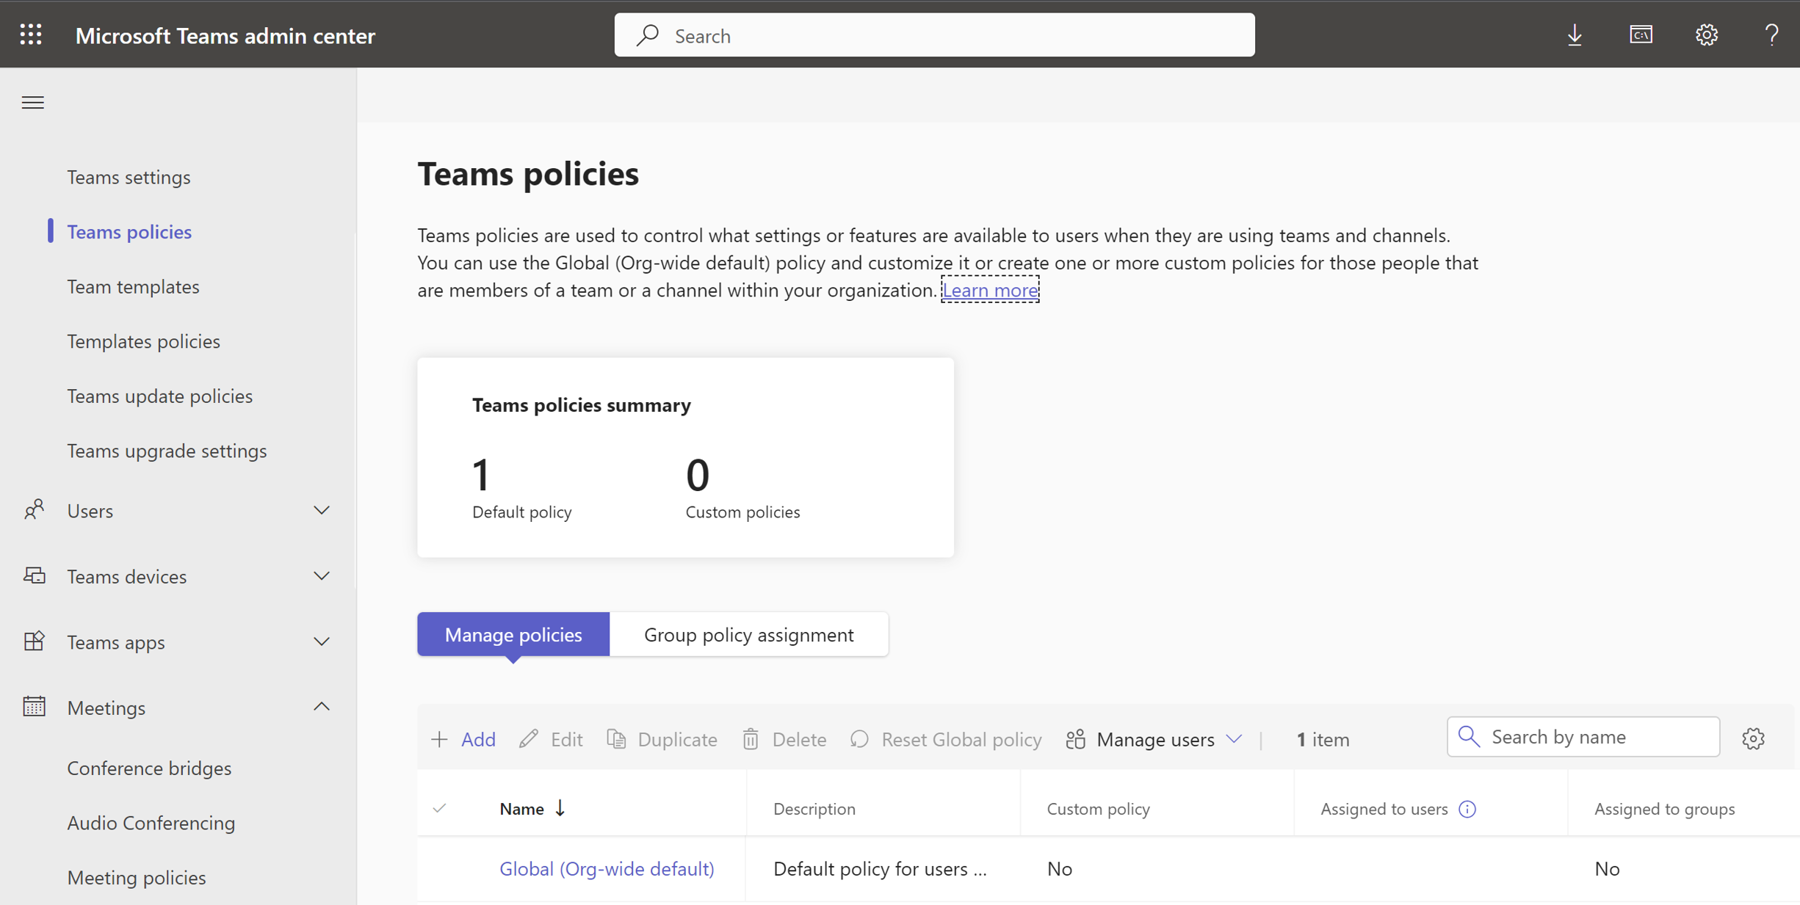 The Teams admin center, focused on Teams policies, where the user can add, edit, and delete policies. In this case, the default (global) policy is the only one entered.